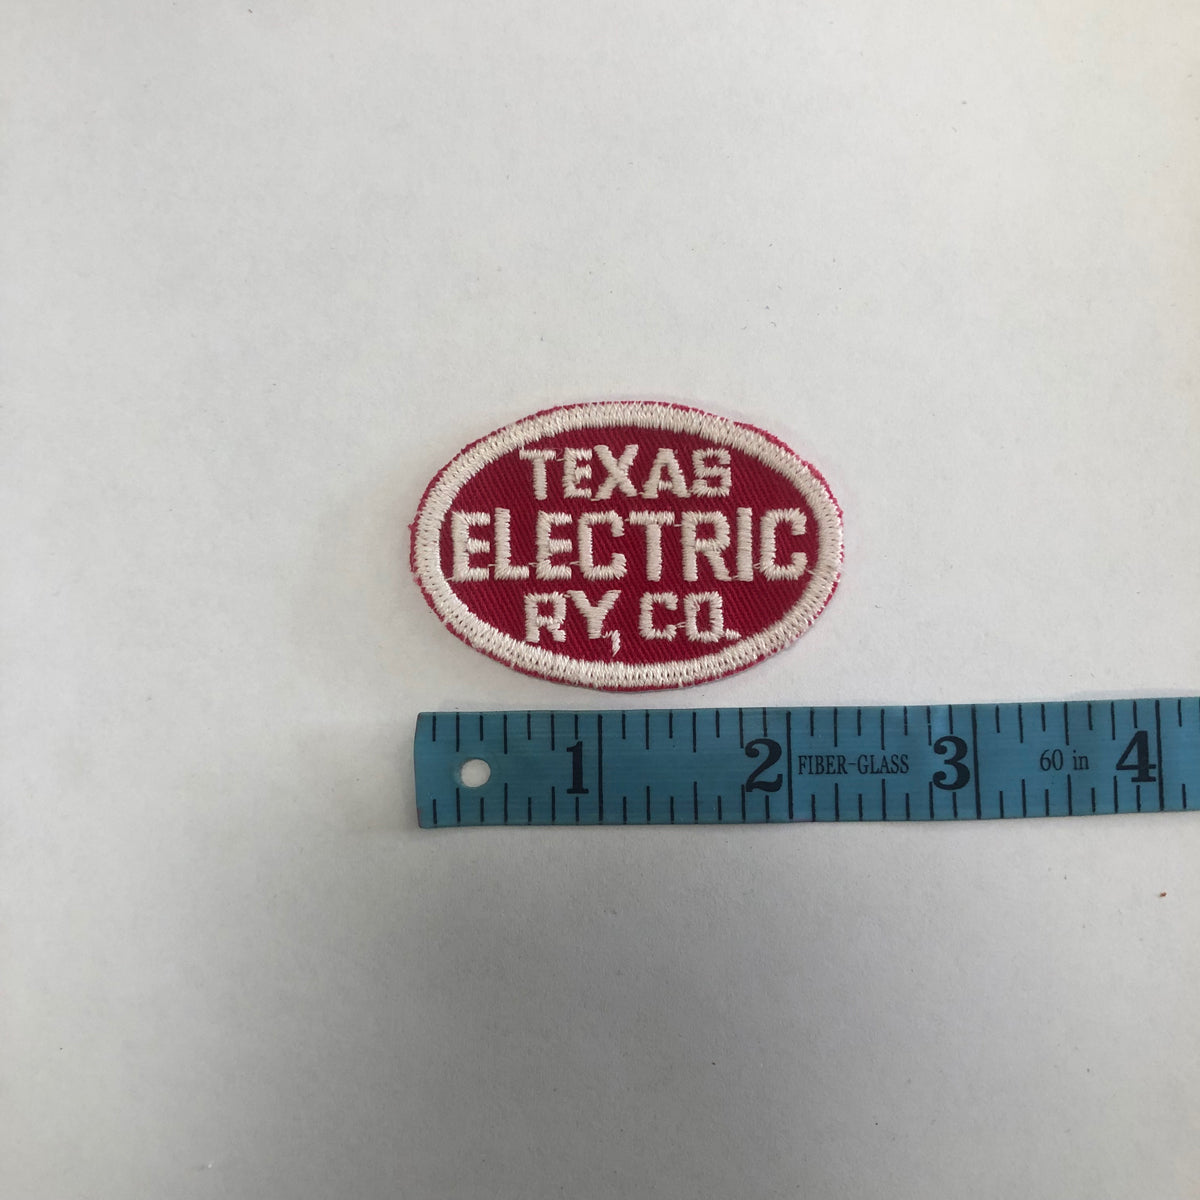 18oz Duck Canvas Navy Vintage 80s HAT Patch "TEXAS Electric Railway Company" Patch